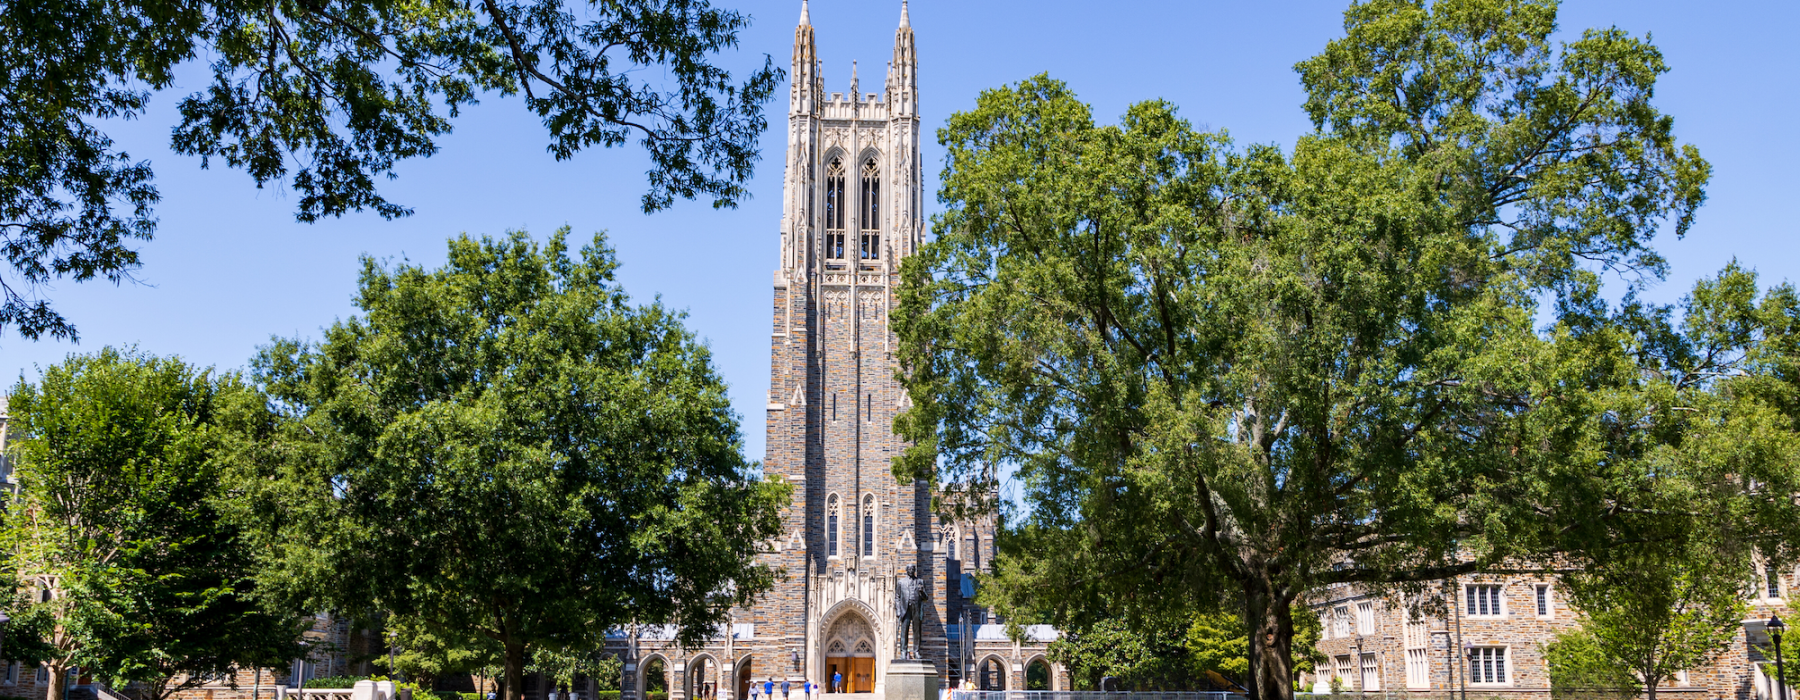 spacious exterior of a building located on the grounds of duke university